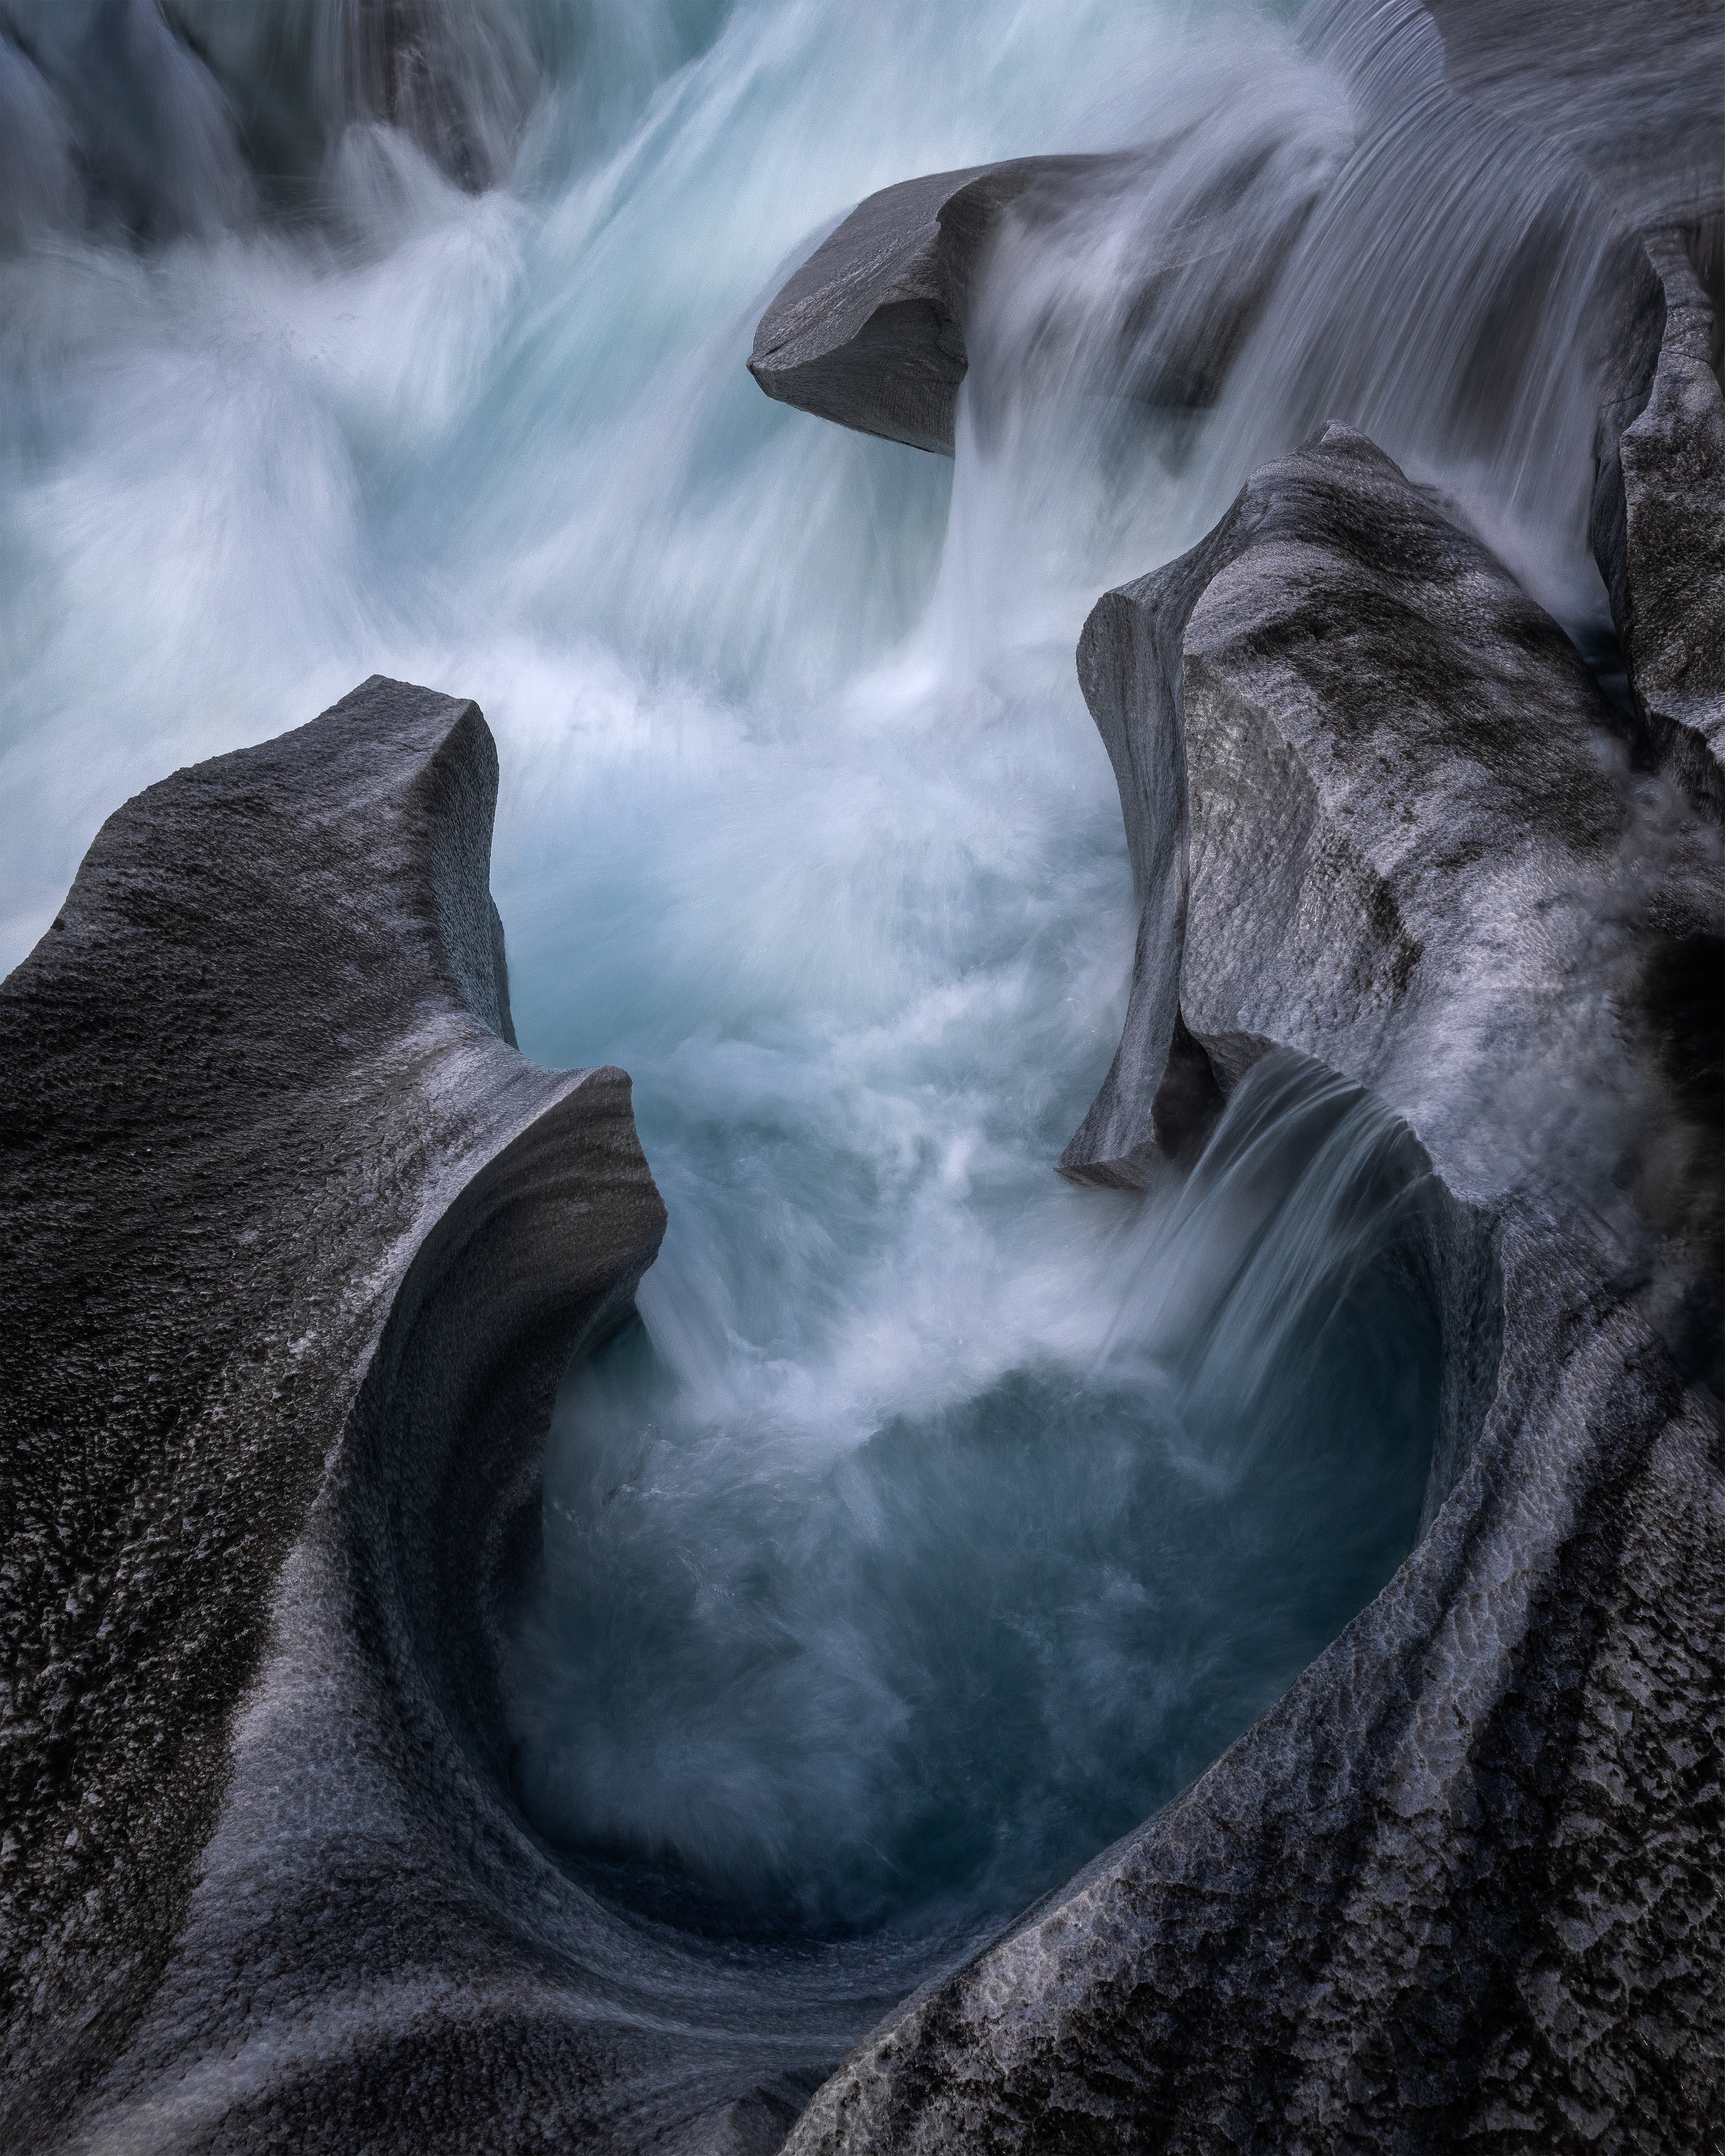 Water flowing on rock formations in Norway. (Photo: Klaus Axelsen)